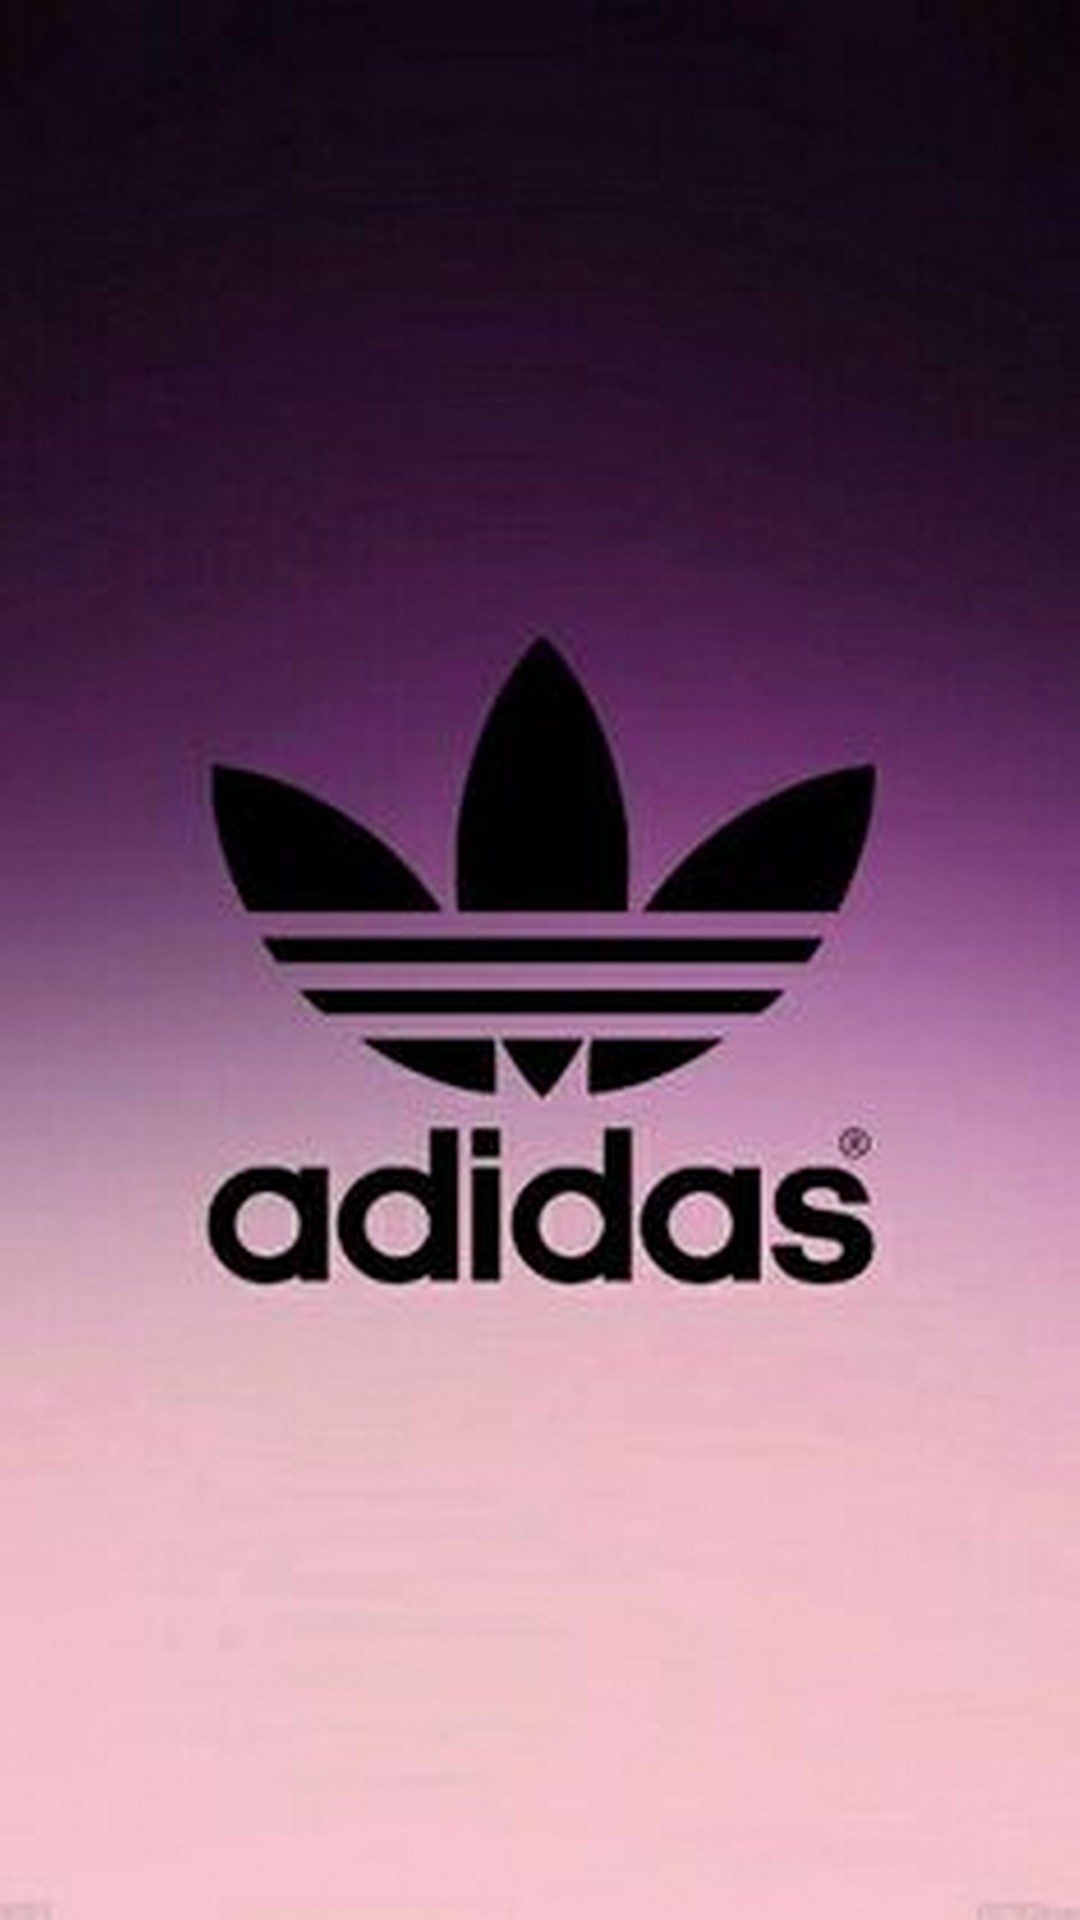 Adidas iPhone Wallpaper With high-resolution 1080X1920 pixel. You can set as wallpaper for Apple iPhone X, XS Max, XR, 8, 7, 6, SE, iPad. Enjoy and share your favorite HD wallpapers and background images